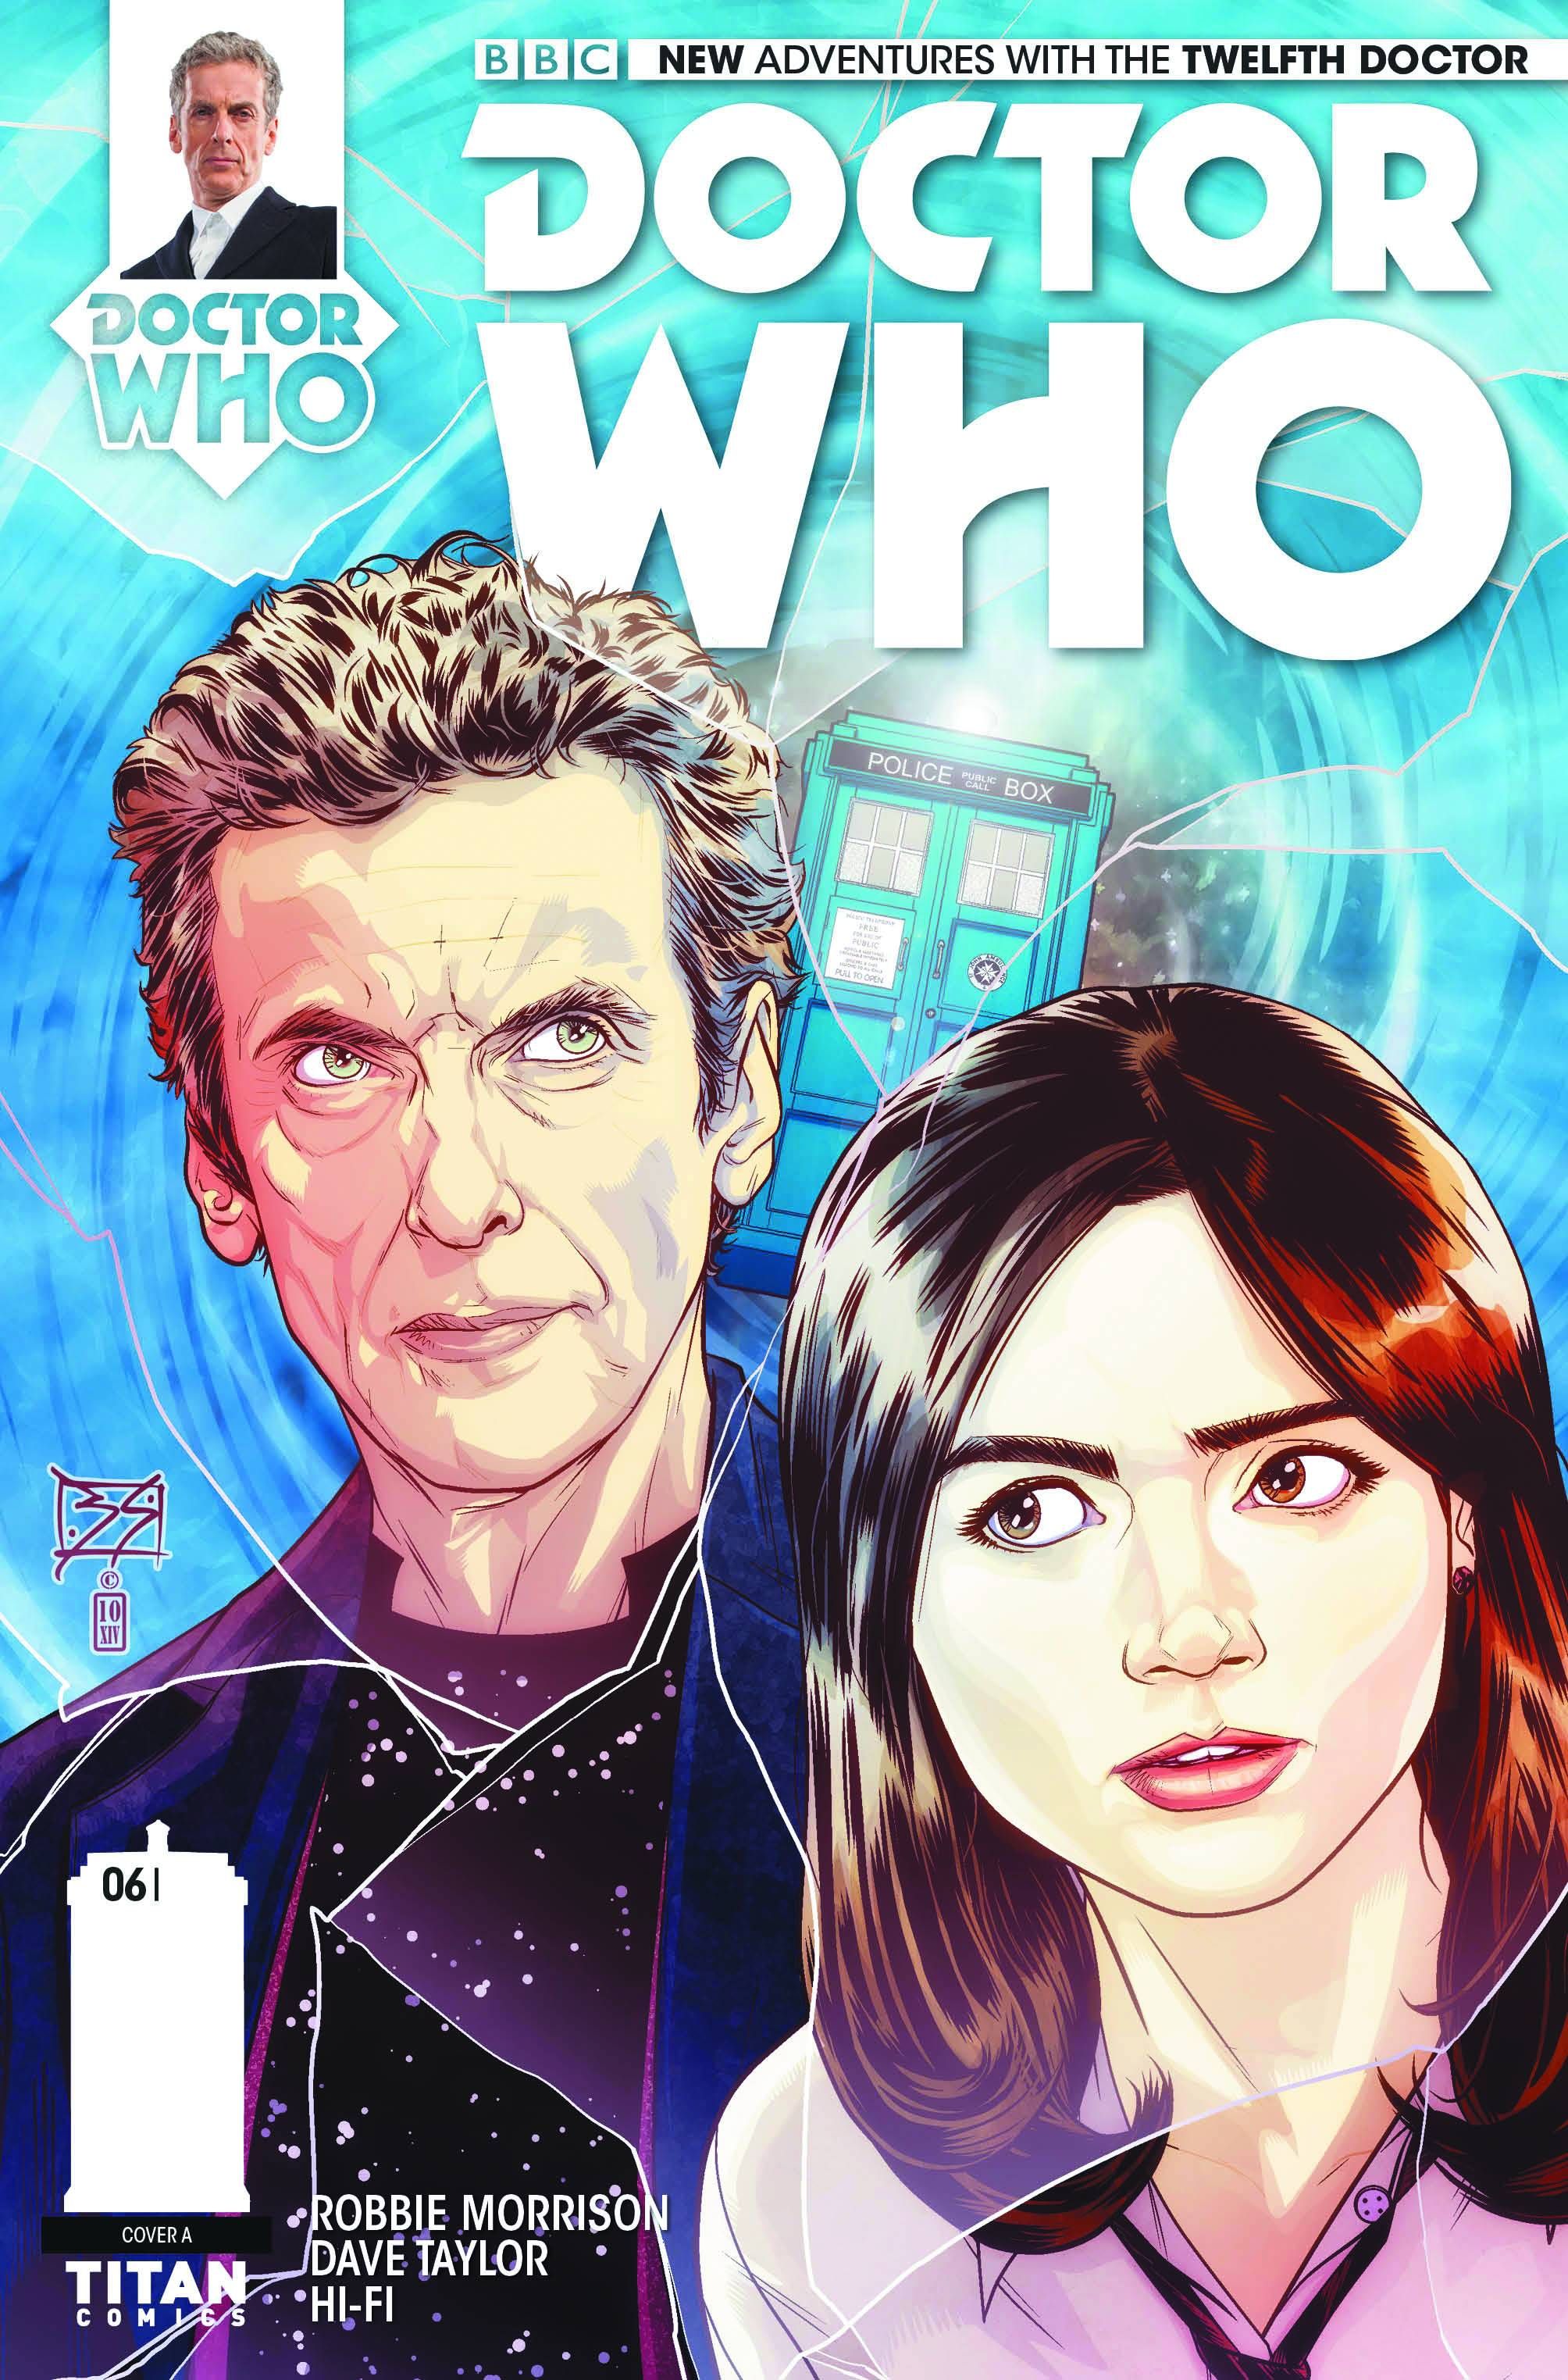 Doctor Who: The Twelfth Doctor #6 Comic